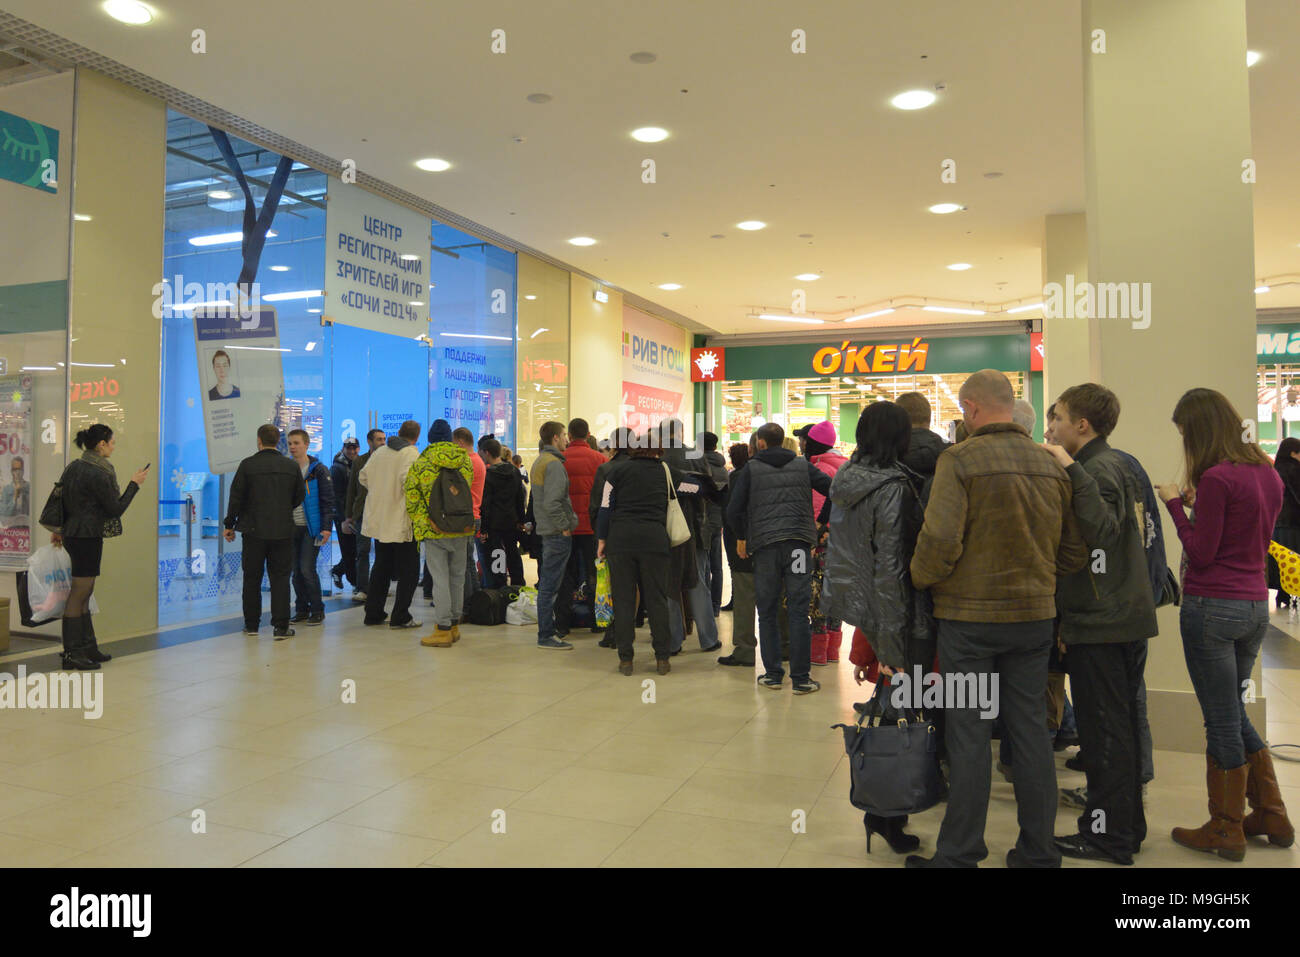 Sochi, Russia - February 12, 2014: Hundreds wait in the line for spectator pass to the XXII Winter Olympics Stock Photo